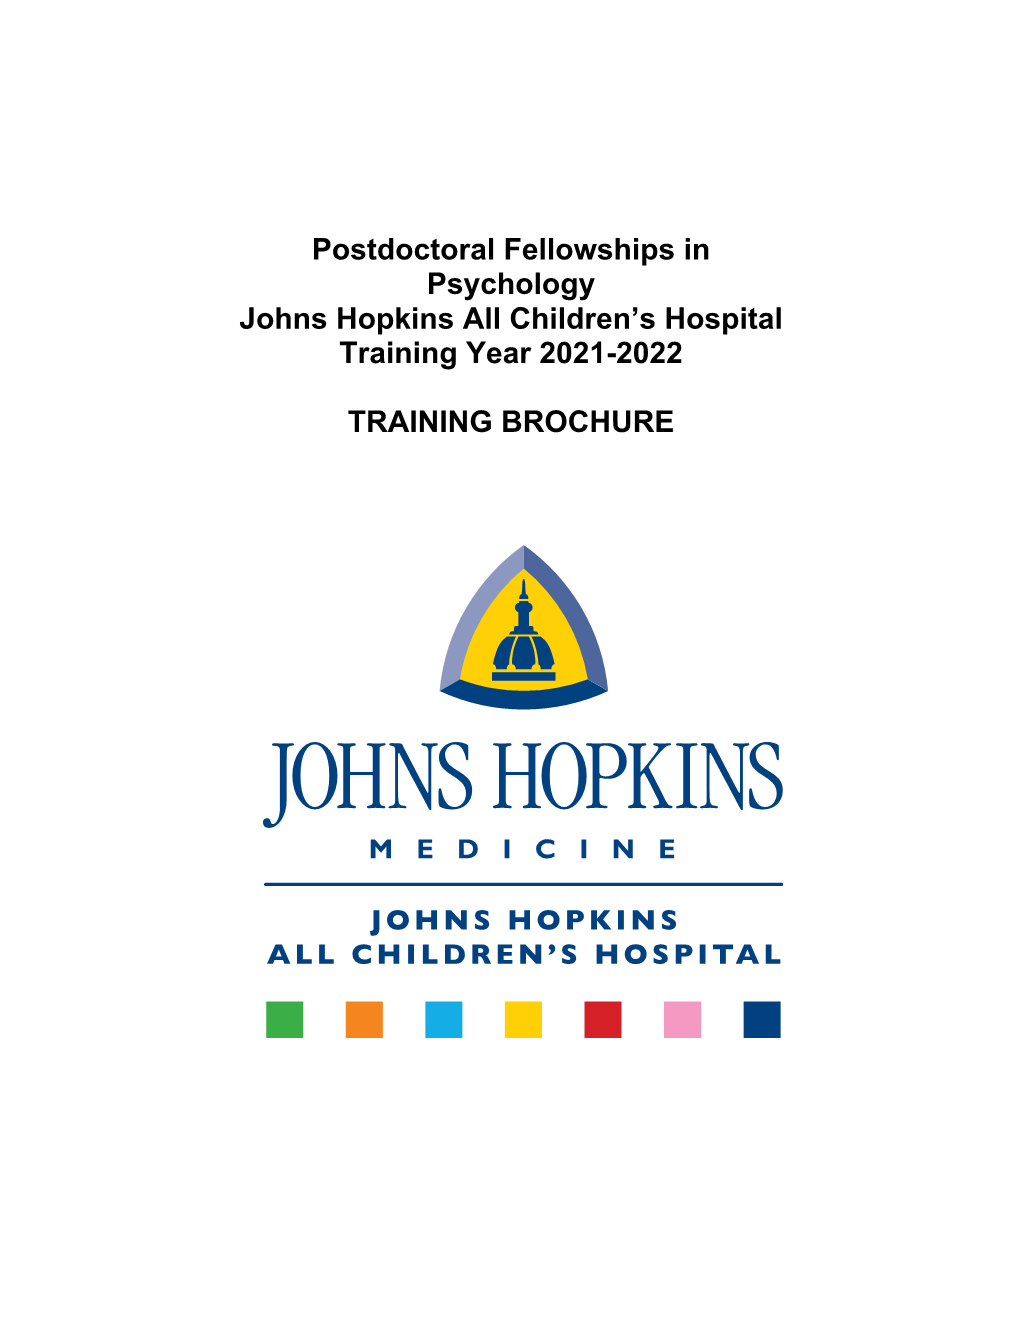 Postdoctoral Fellowships in Psychology Johns Hopkins All Children’S Hospital Training Year 2021-2022